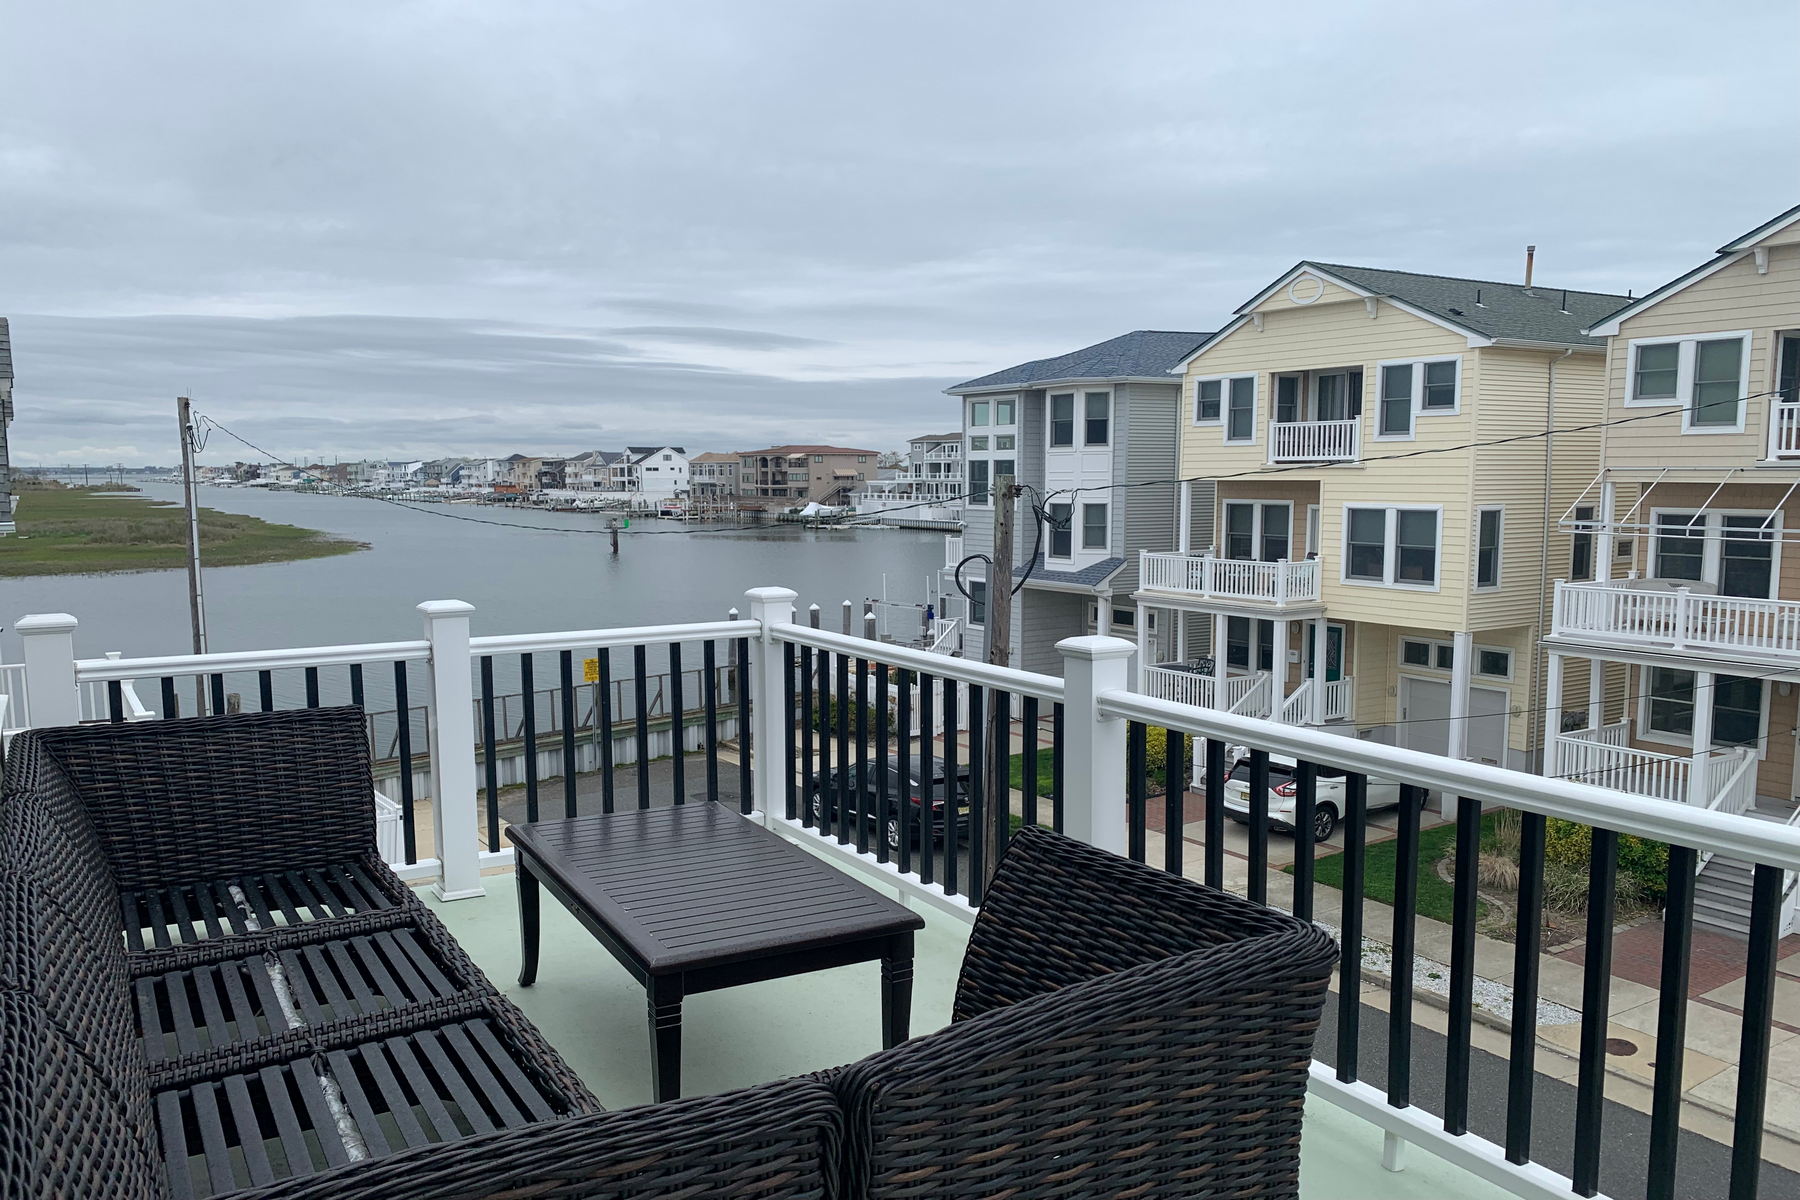 9. Condominiums at 222 N Princeton Ave Ventnor, New Jersey 08406 United States